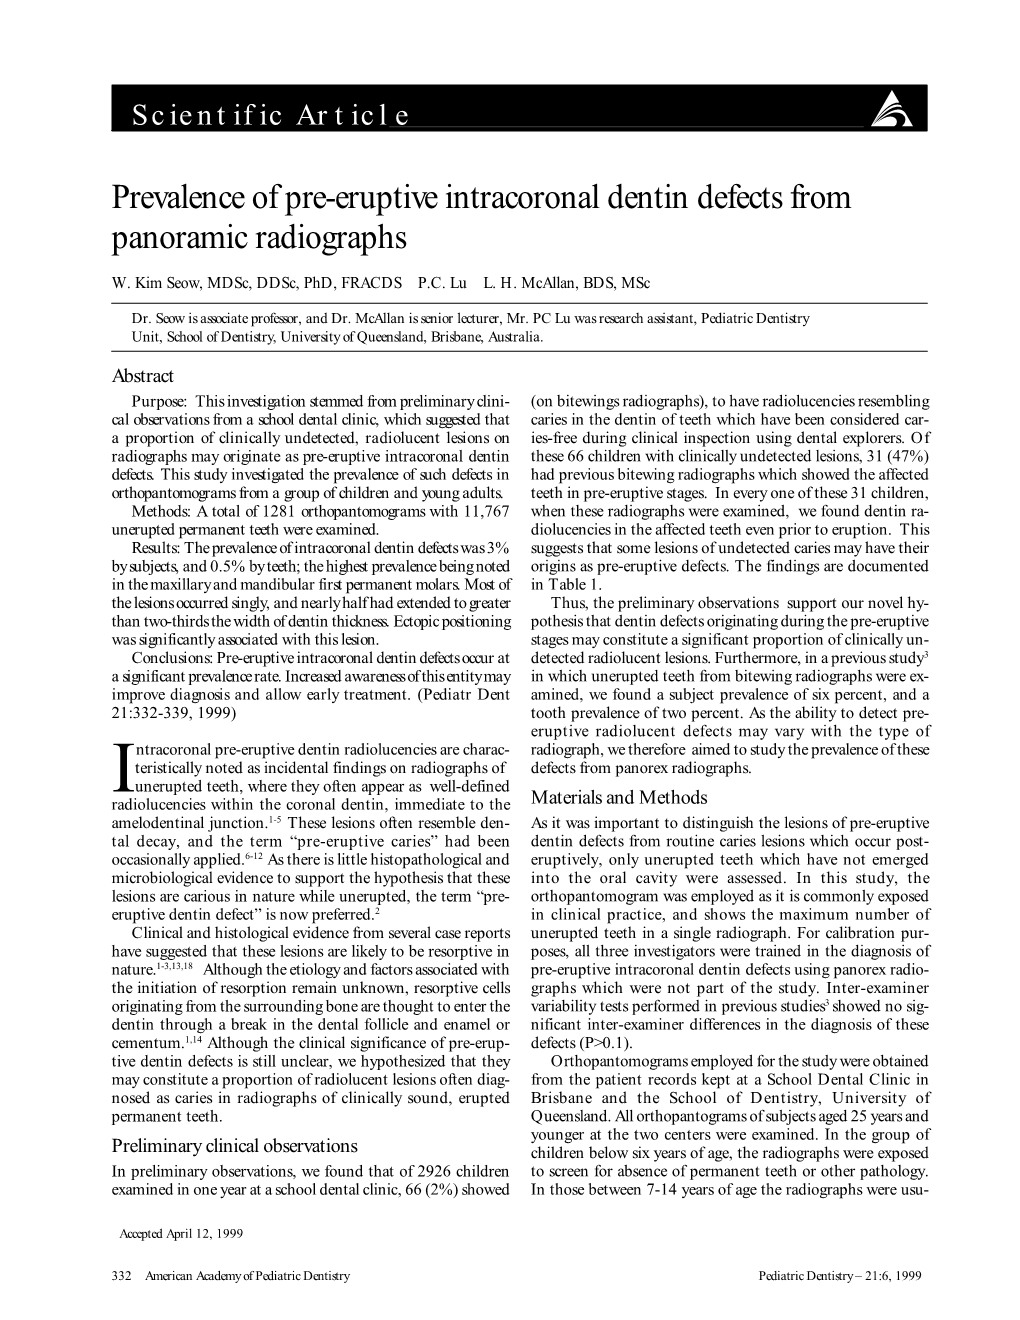 Prevalence of Pre-Eruptive Intracoronal Dentin Defects from Panoramic Radiographs